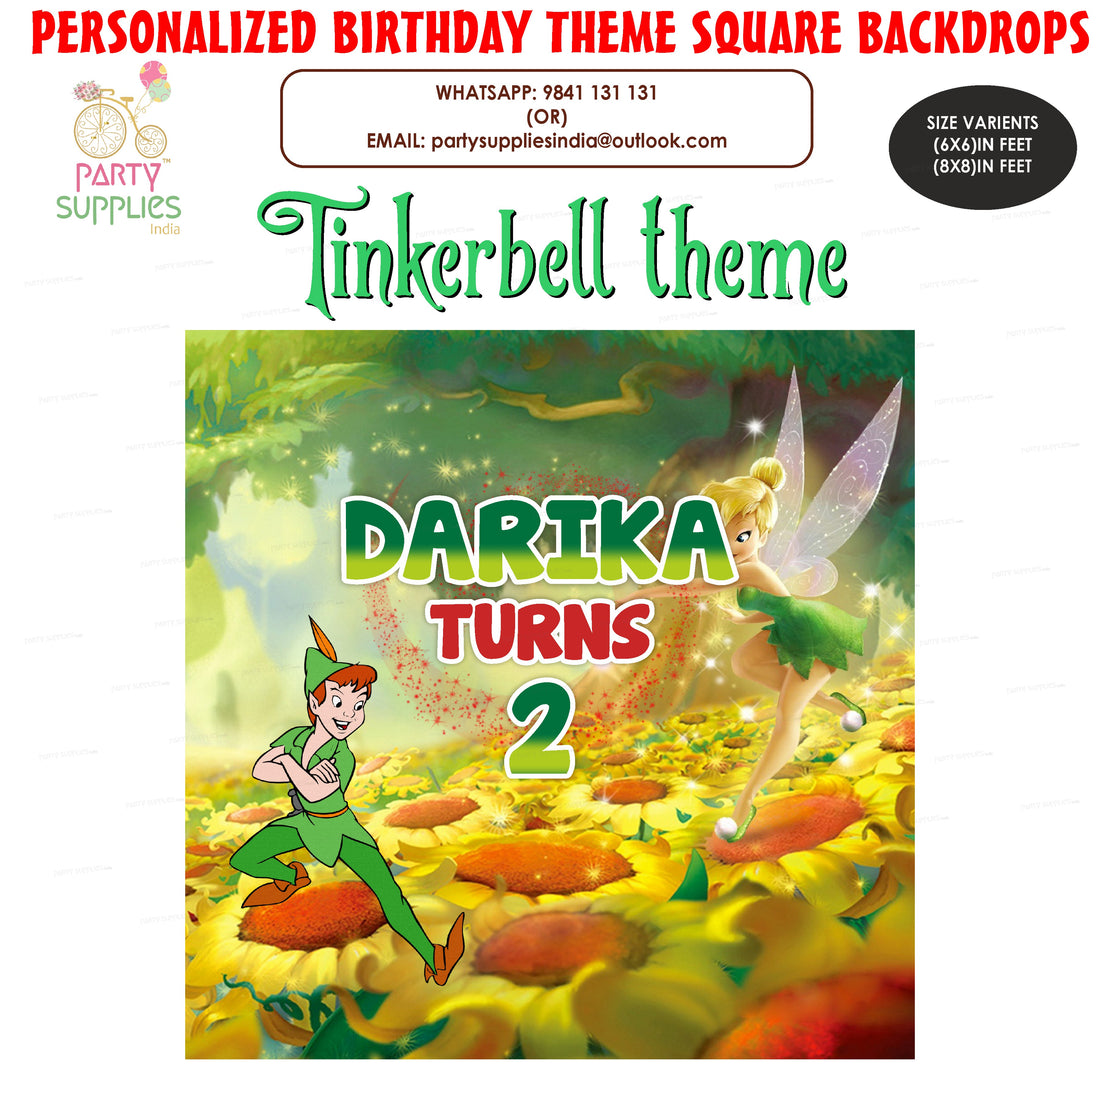 Tinker Bell Theme Personalized Square Backdrop